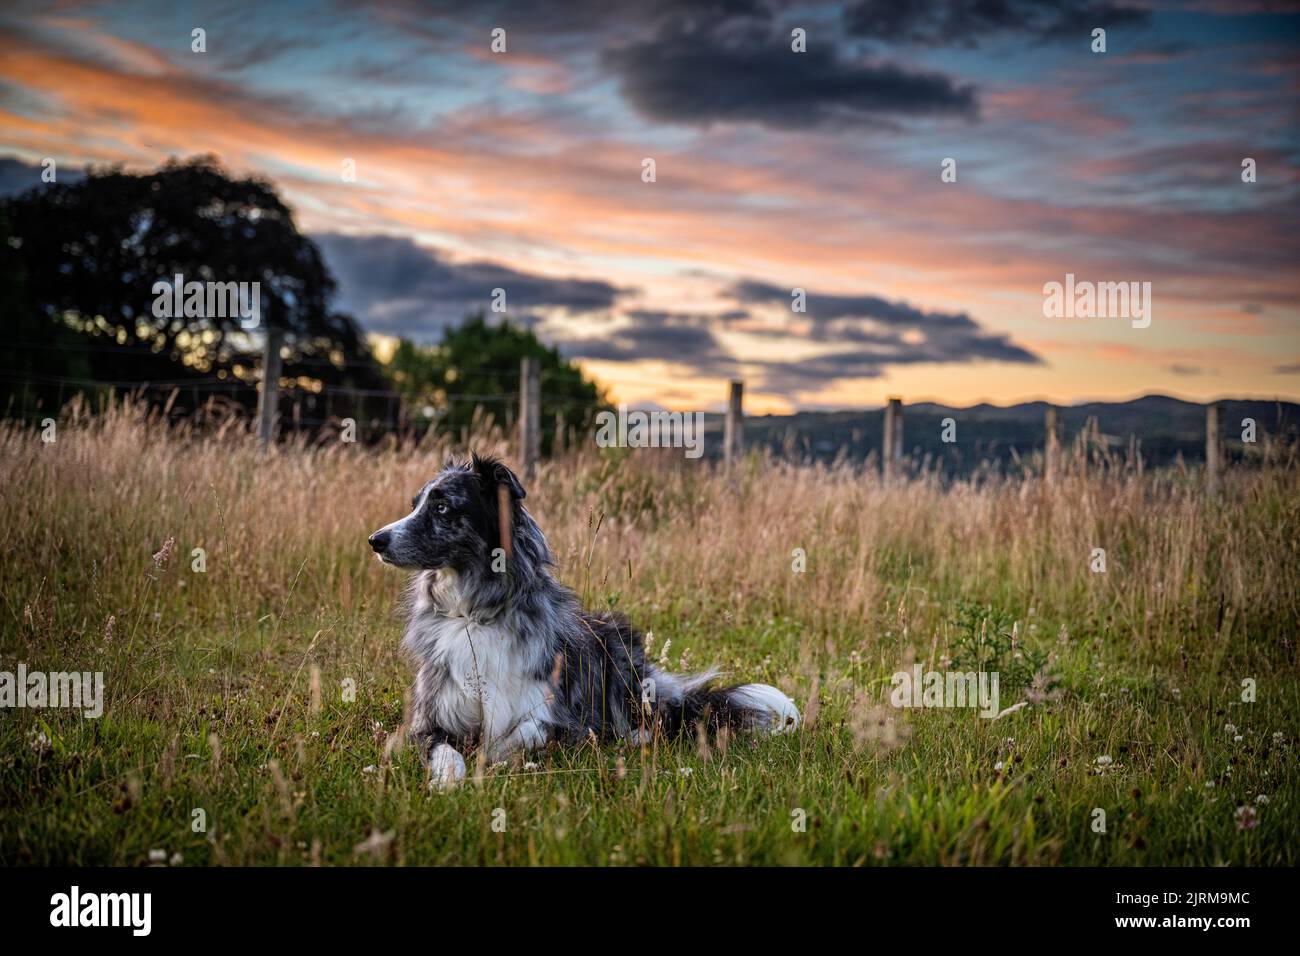 Roki our border collie out front of the house on a summer evening.  This was just a quick test shoot with the Z7 mk II and 24-70 f2.8 S, it all seems Stock Photo